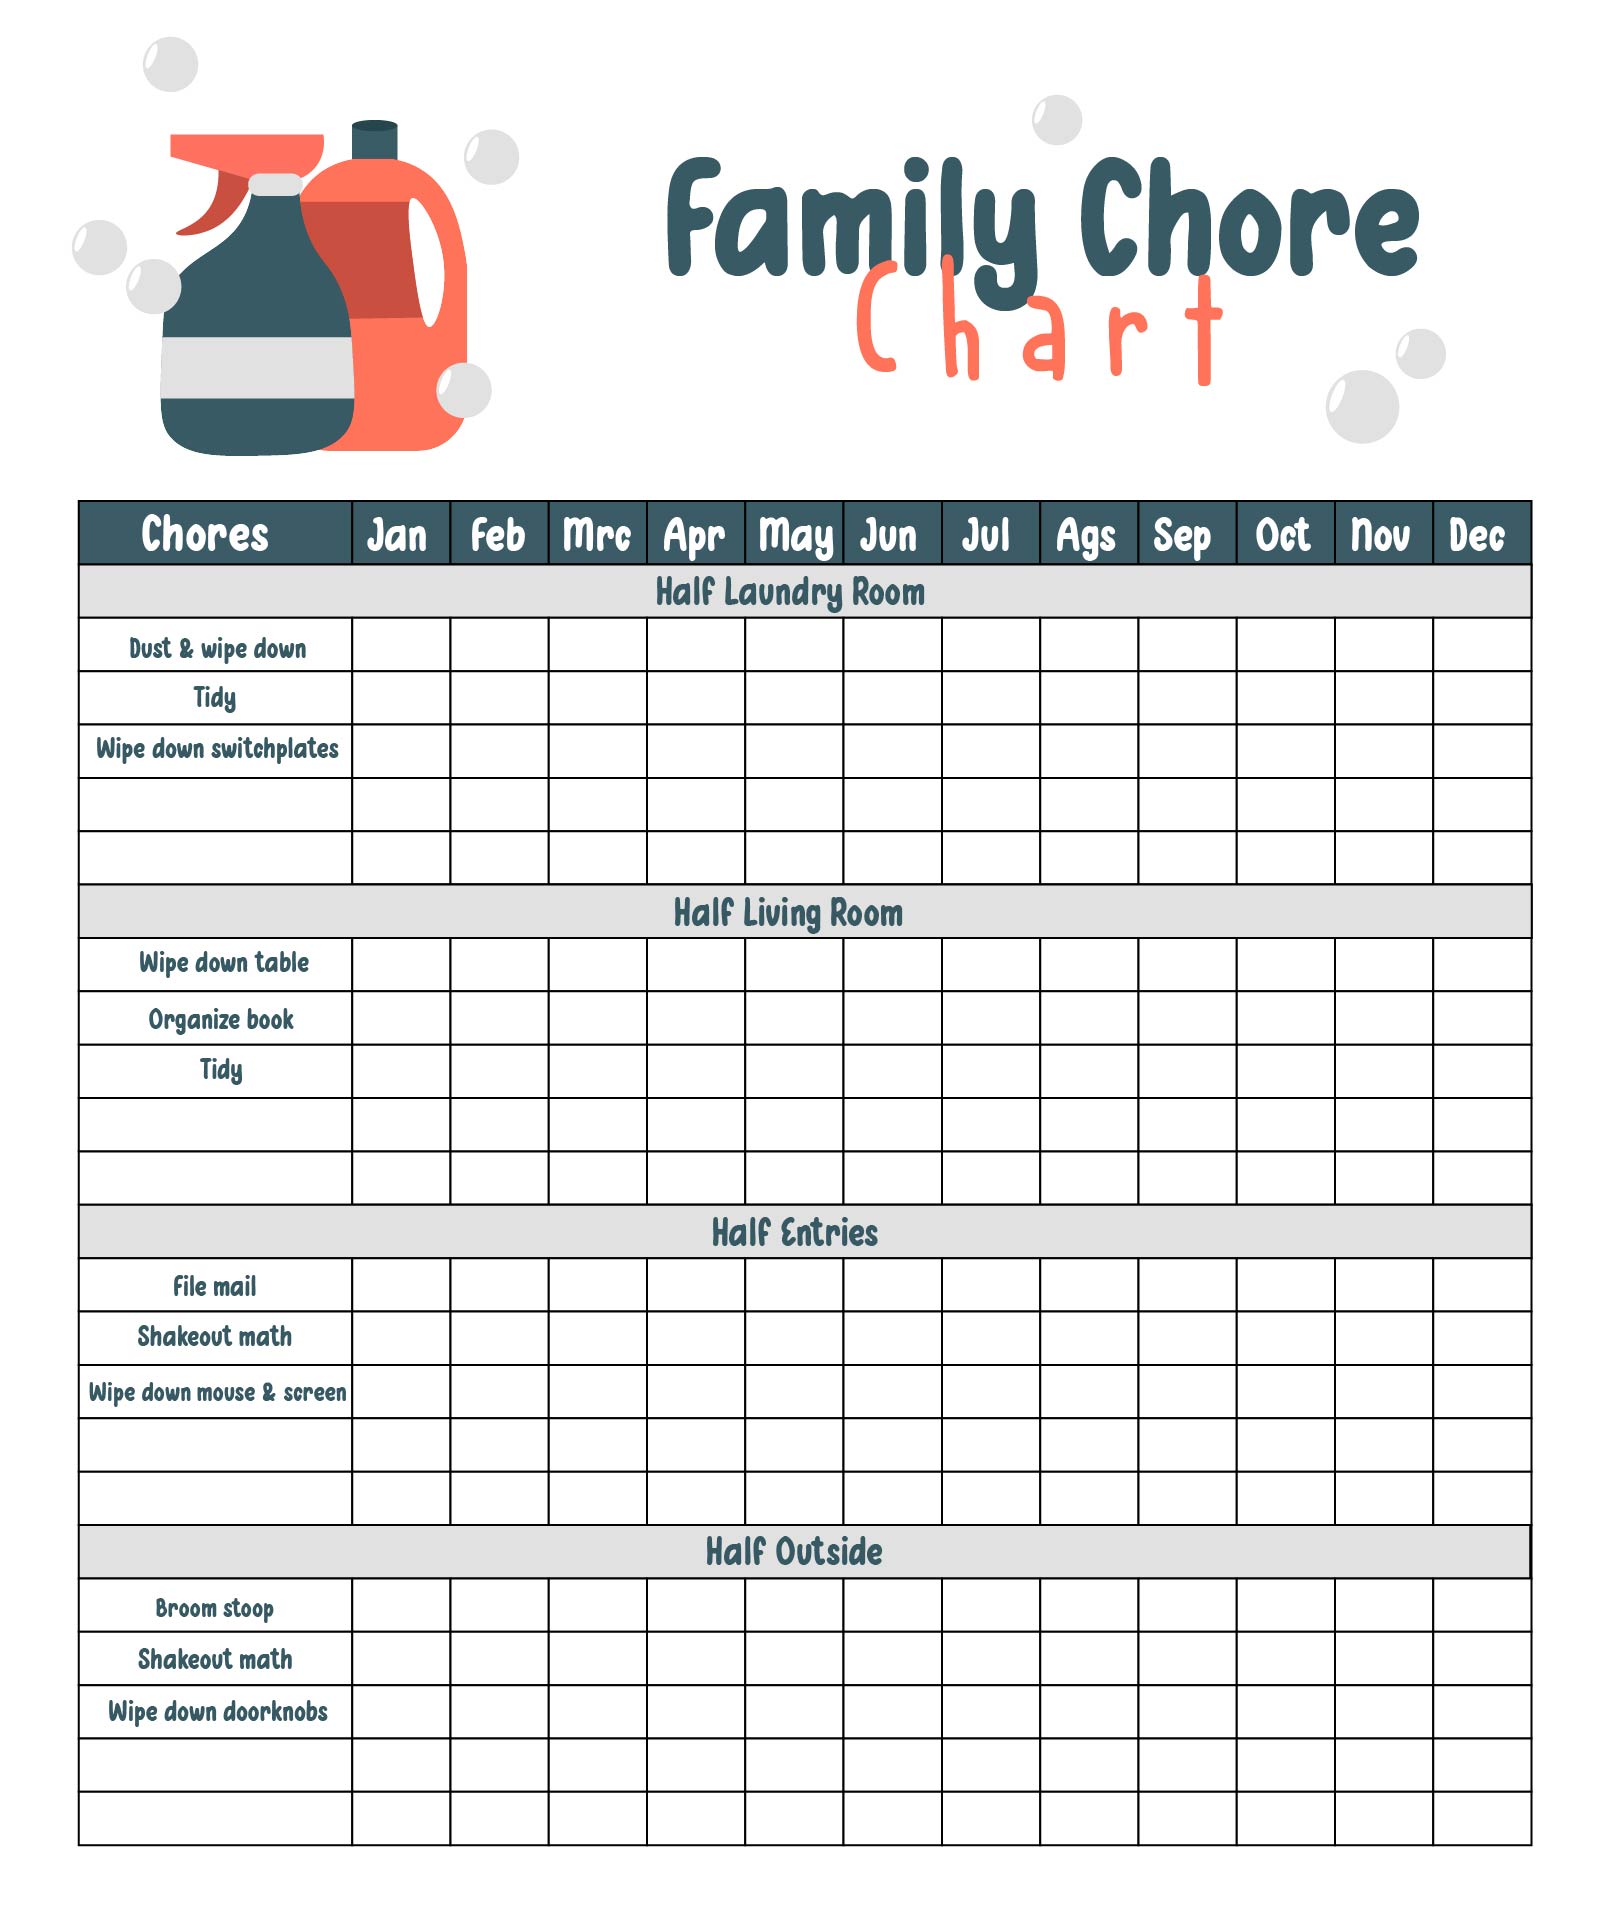 5-best-images-of-large-family-chore-chart-printable-family-chore